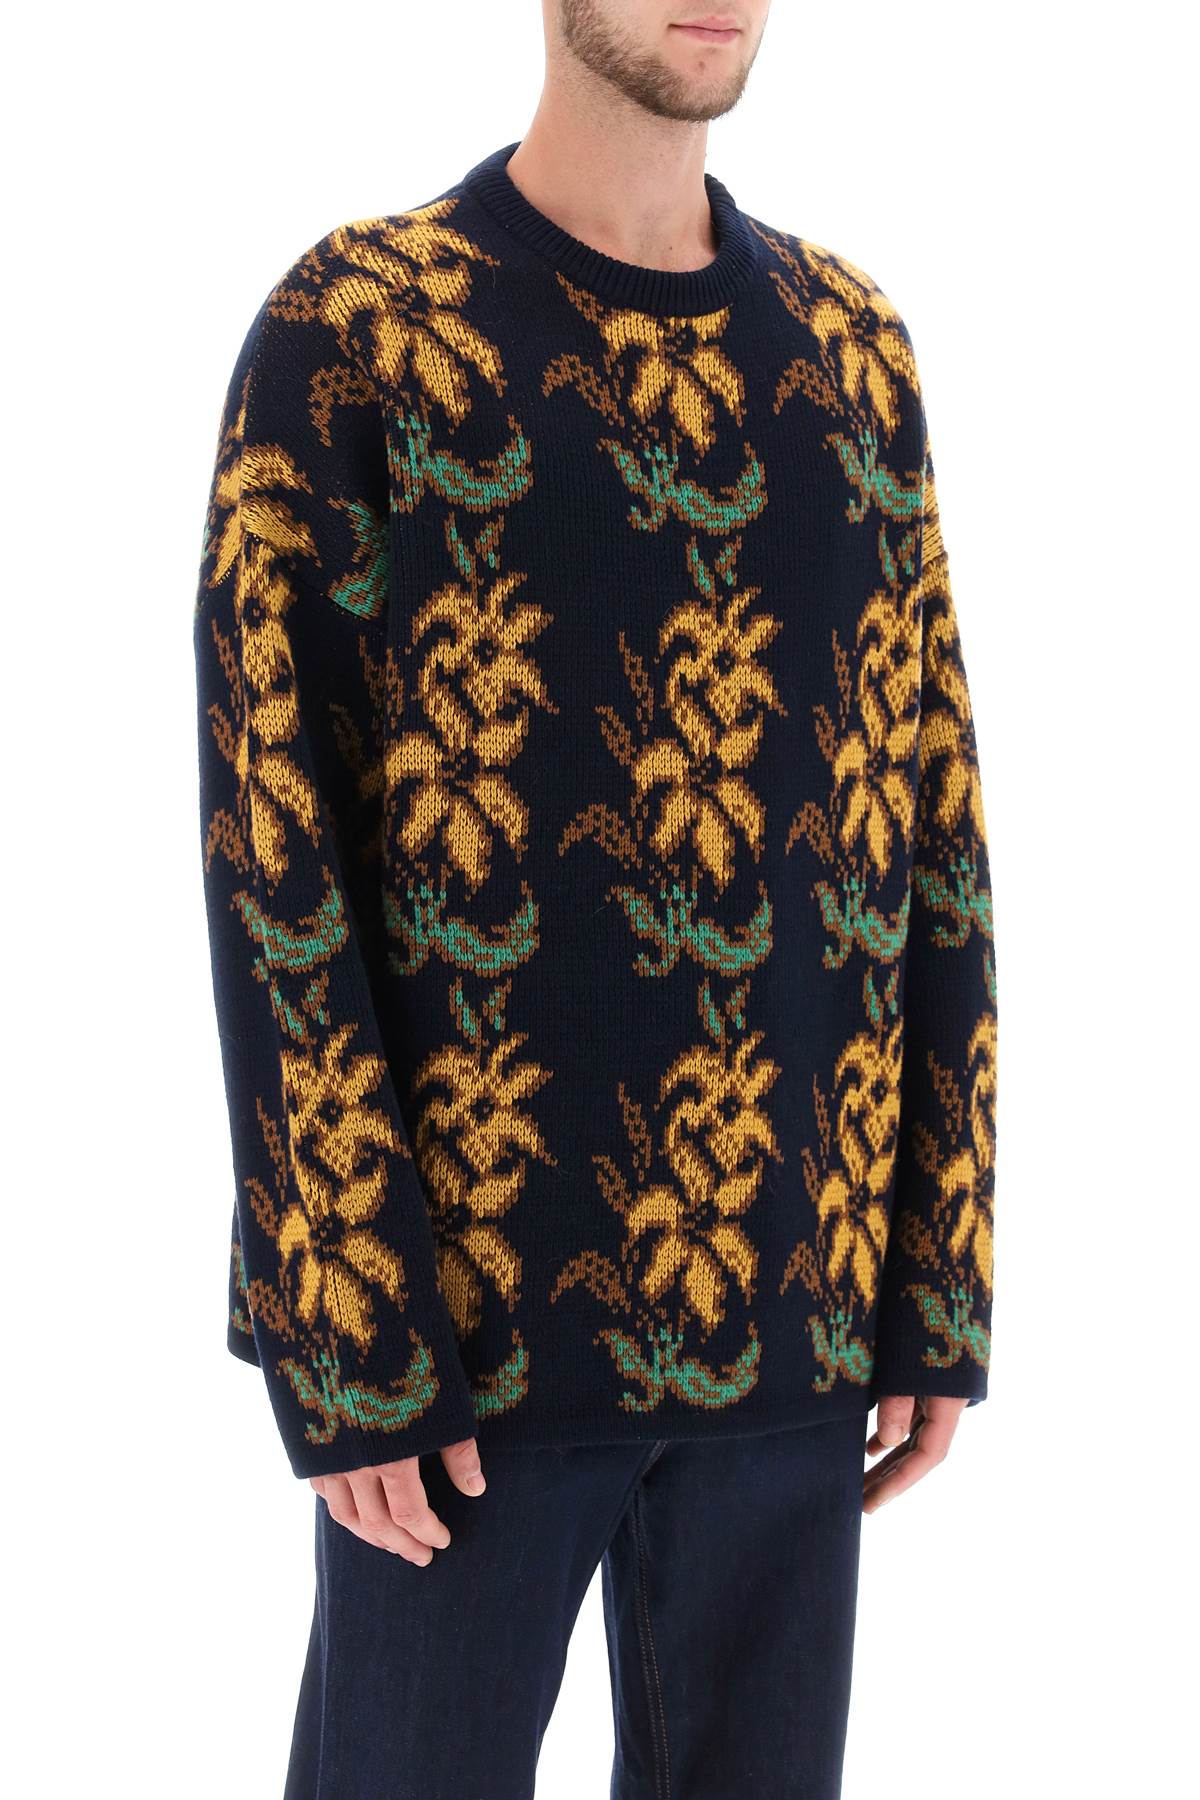 Etro sweater with floral pattern-1